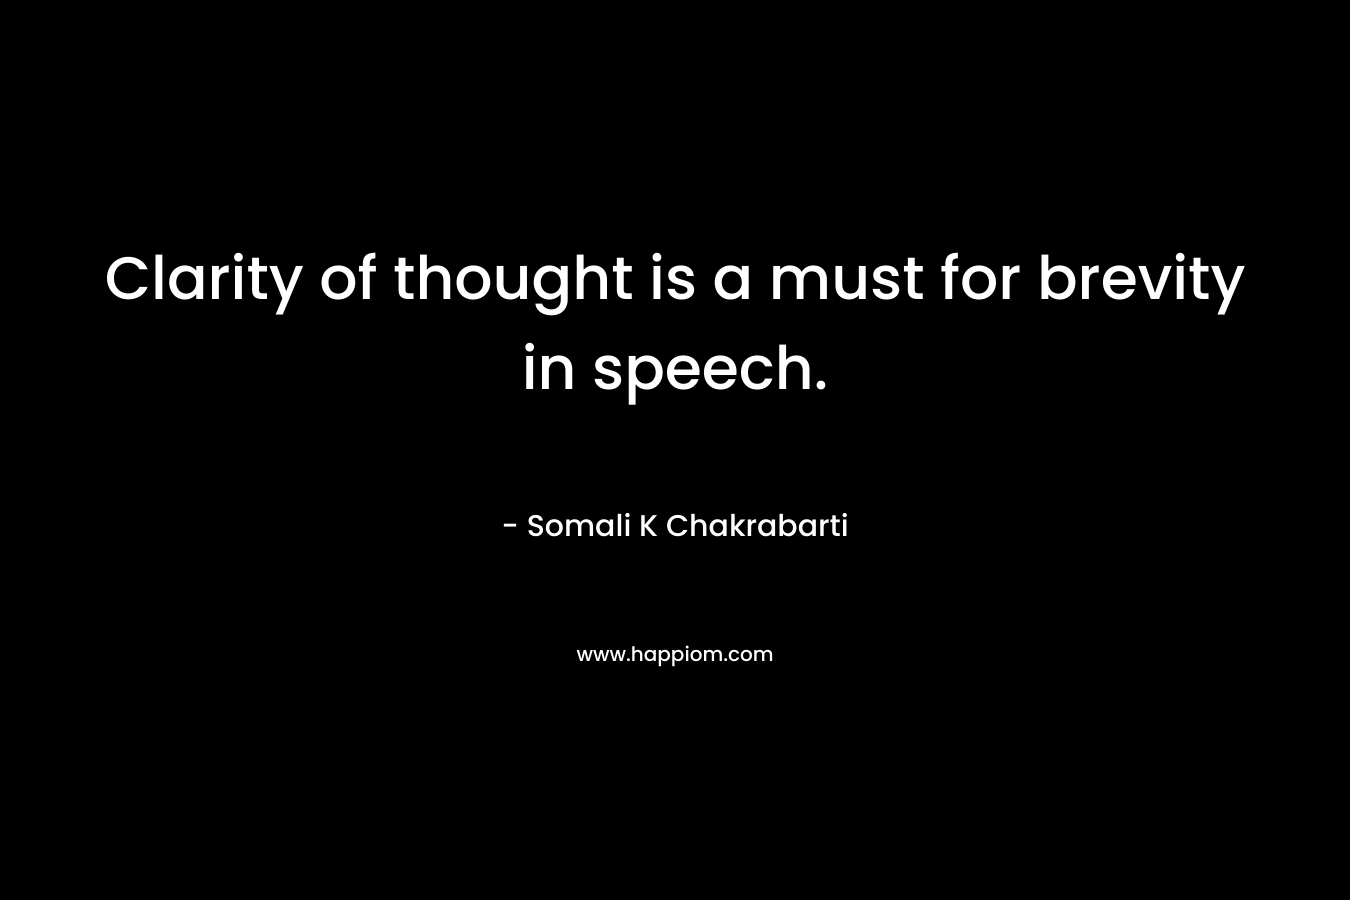 Clarity of thought is a must for brevity in speech. – Somali K Chakrabarti